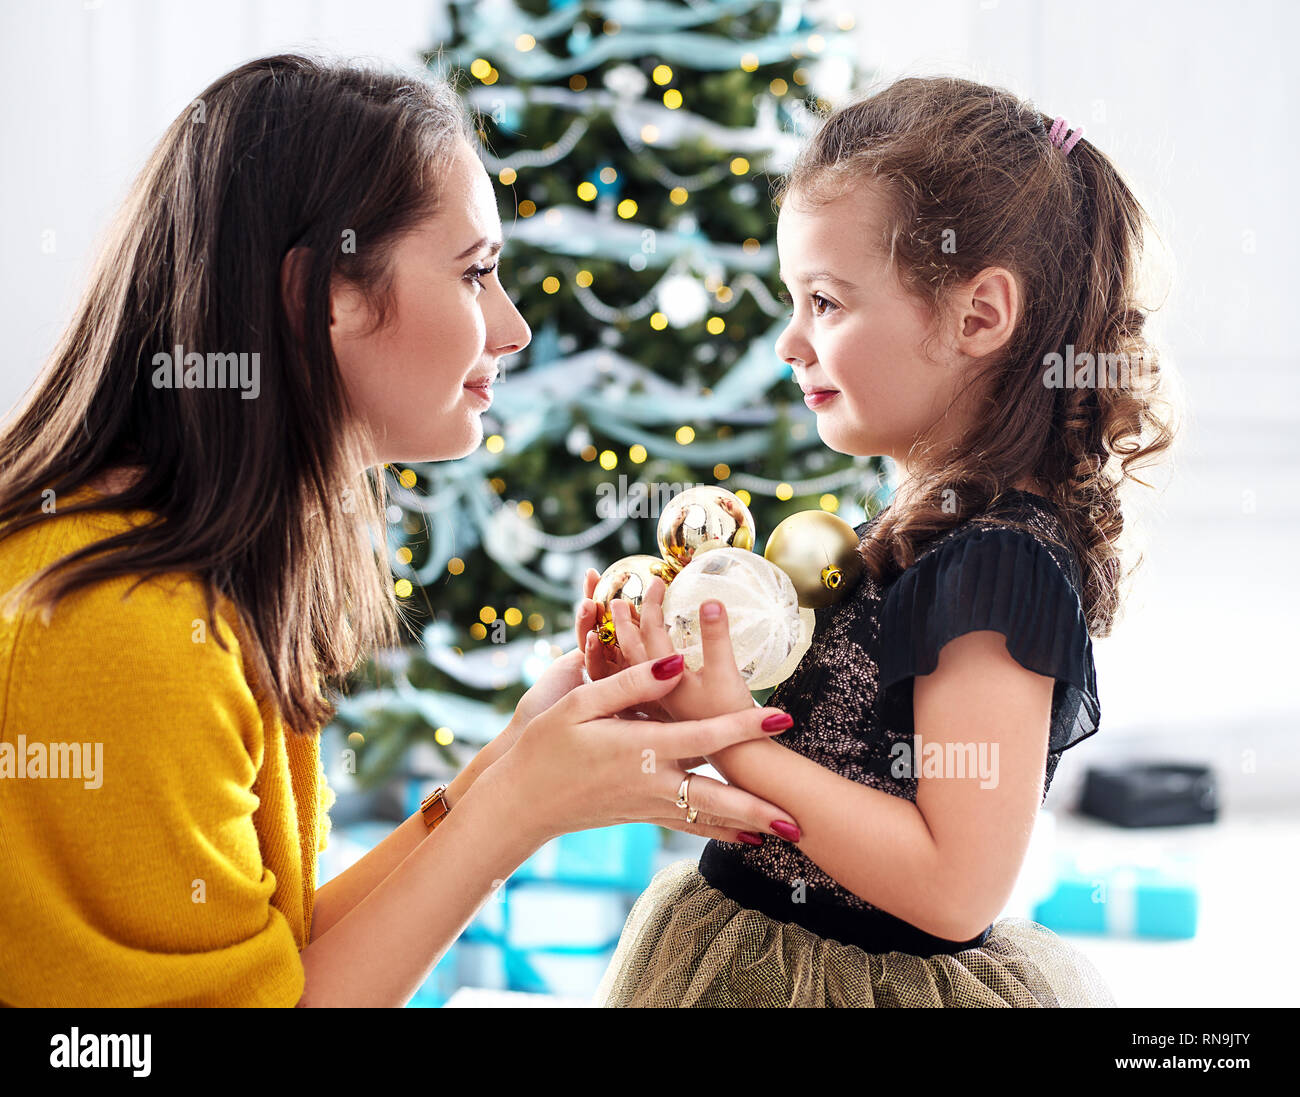 Mother and daughter holding colorful glass balls Stock Photo